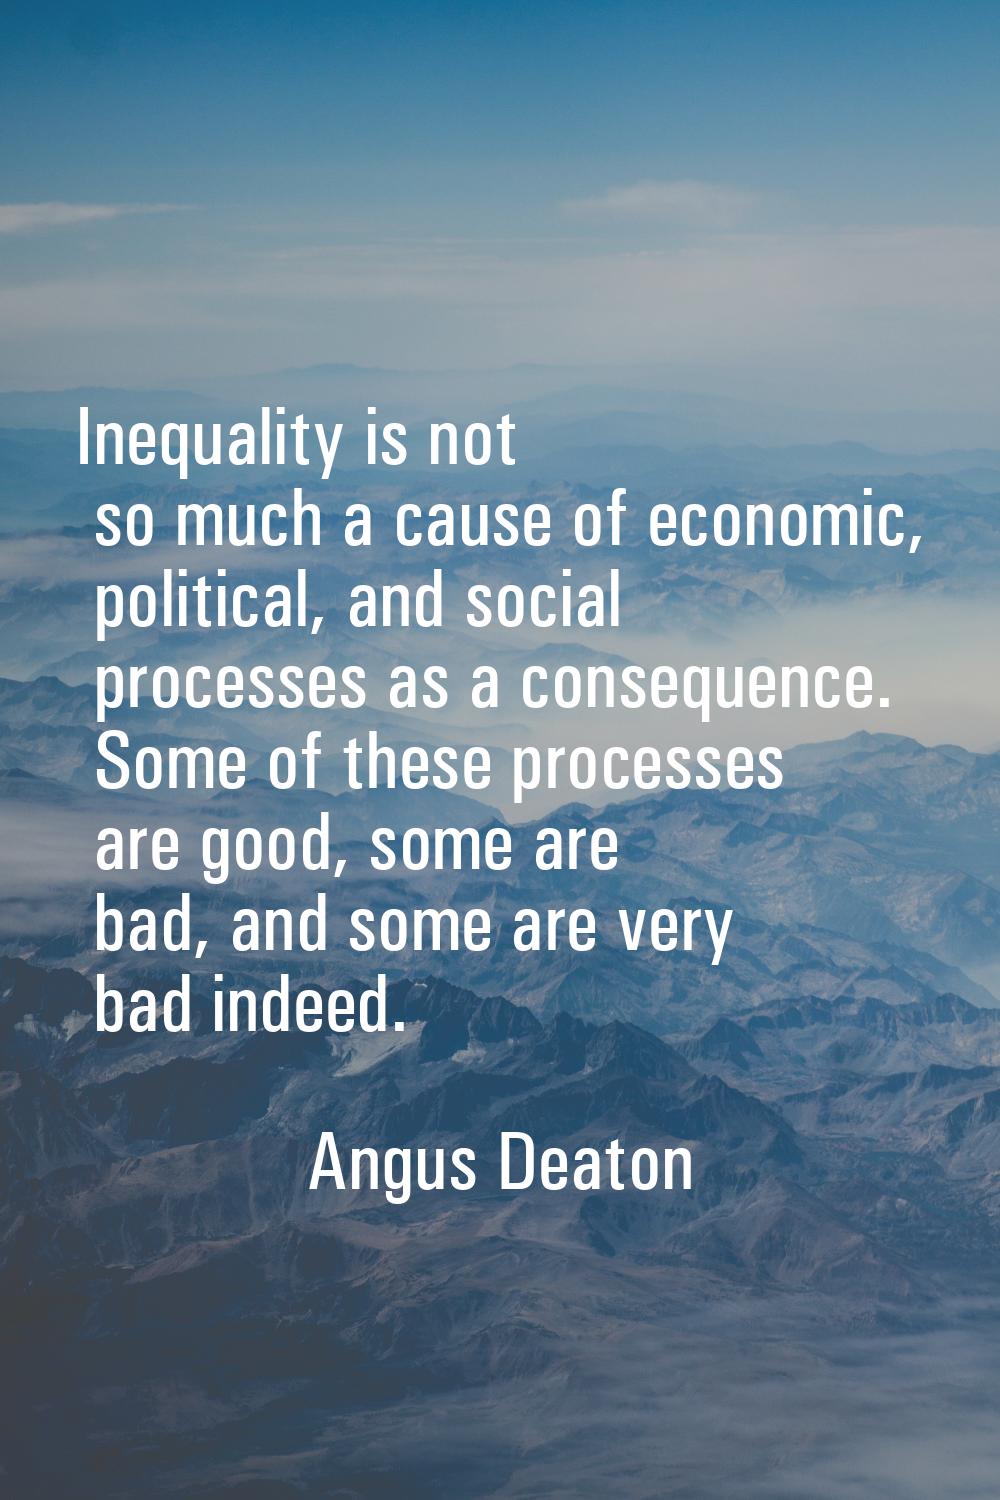 Inequality is not so much a cause of economic, political, and social processes as a consequence. So